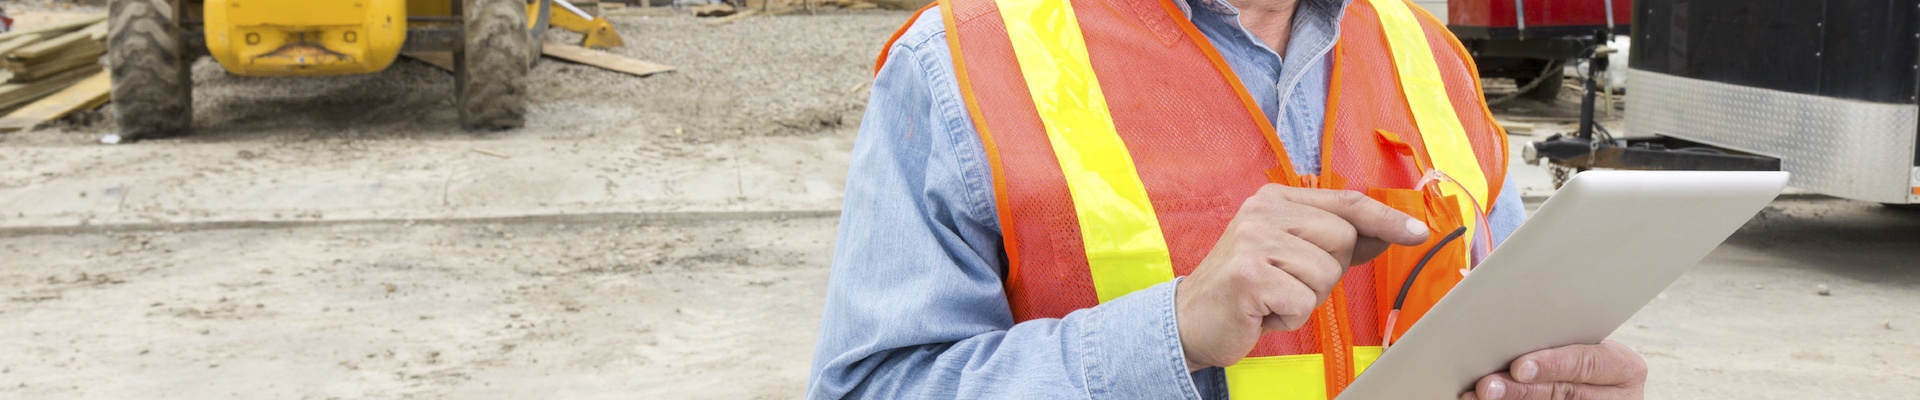 A royalty free image from the construction industry of a construction worker at a new home building site.